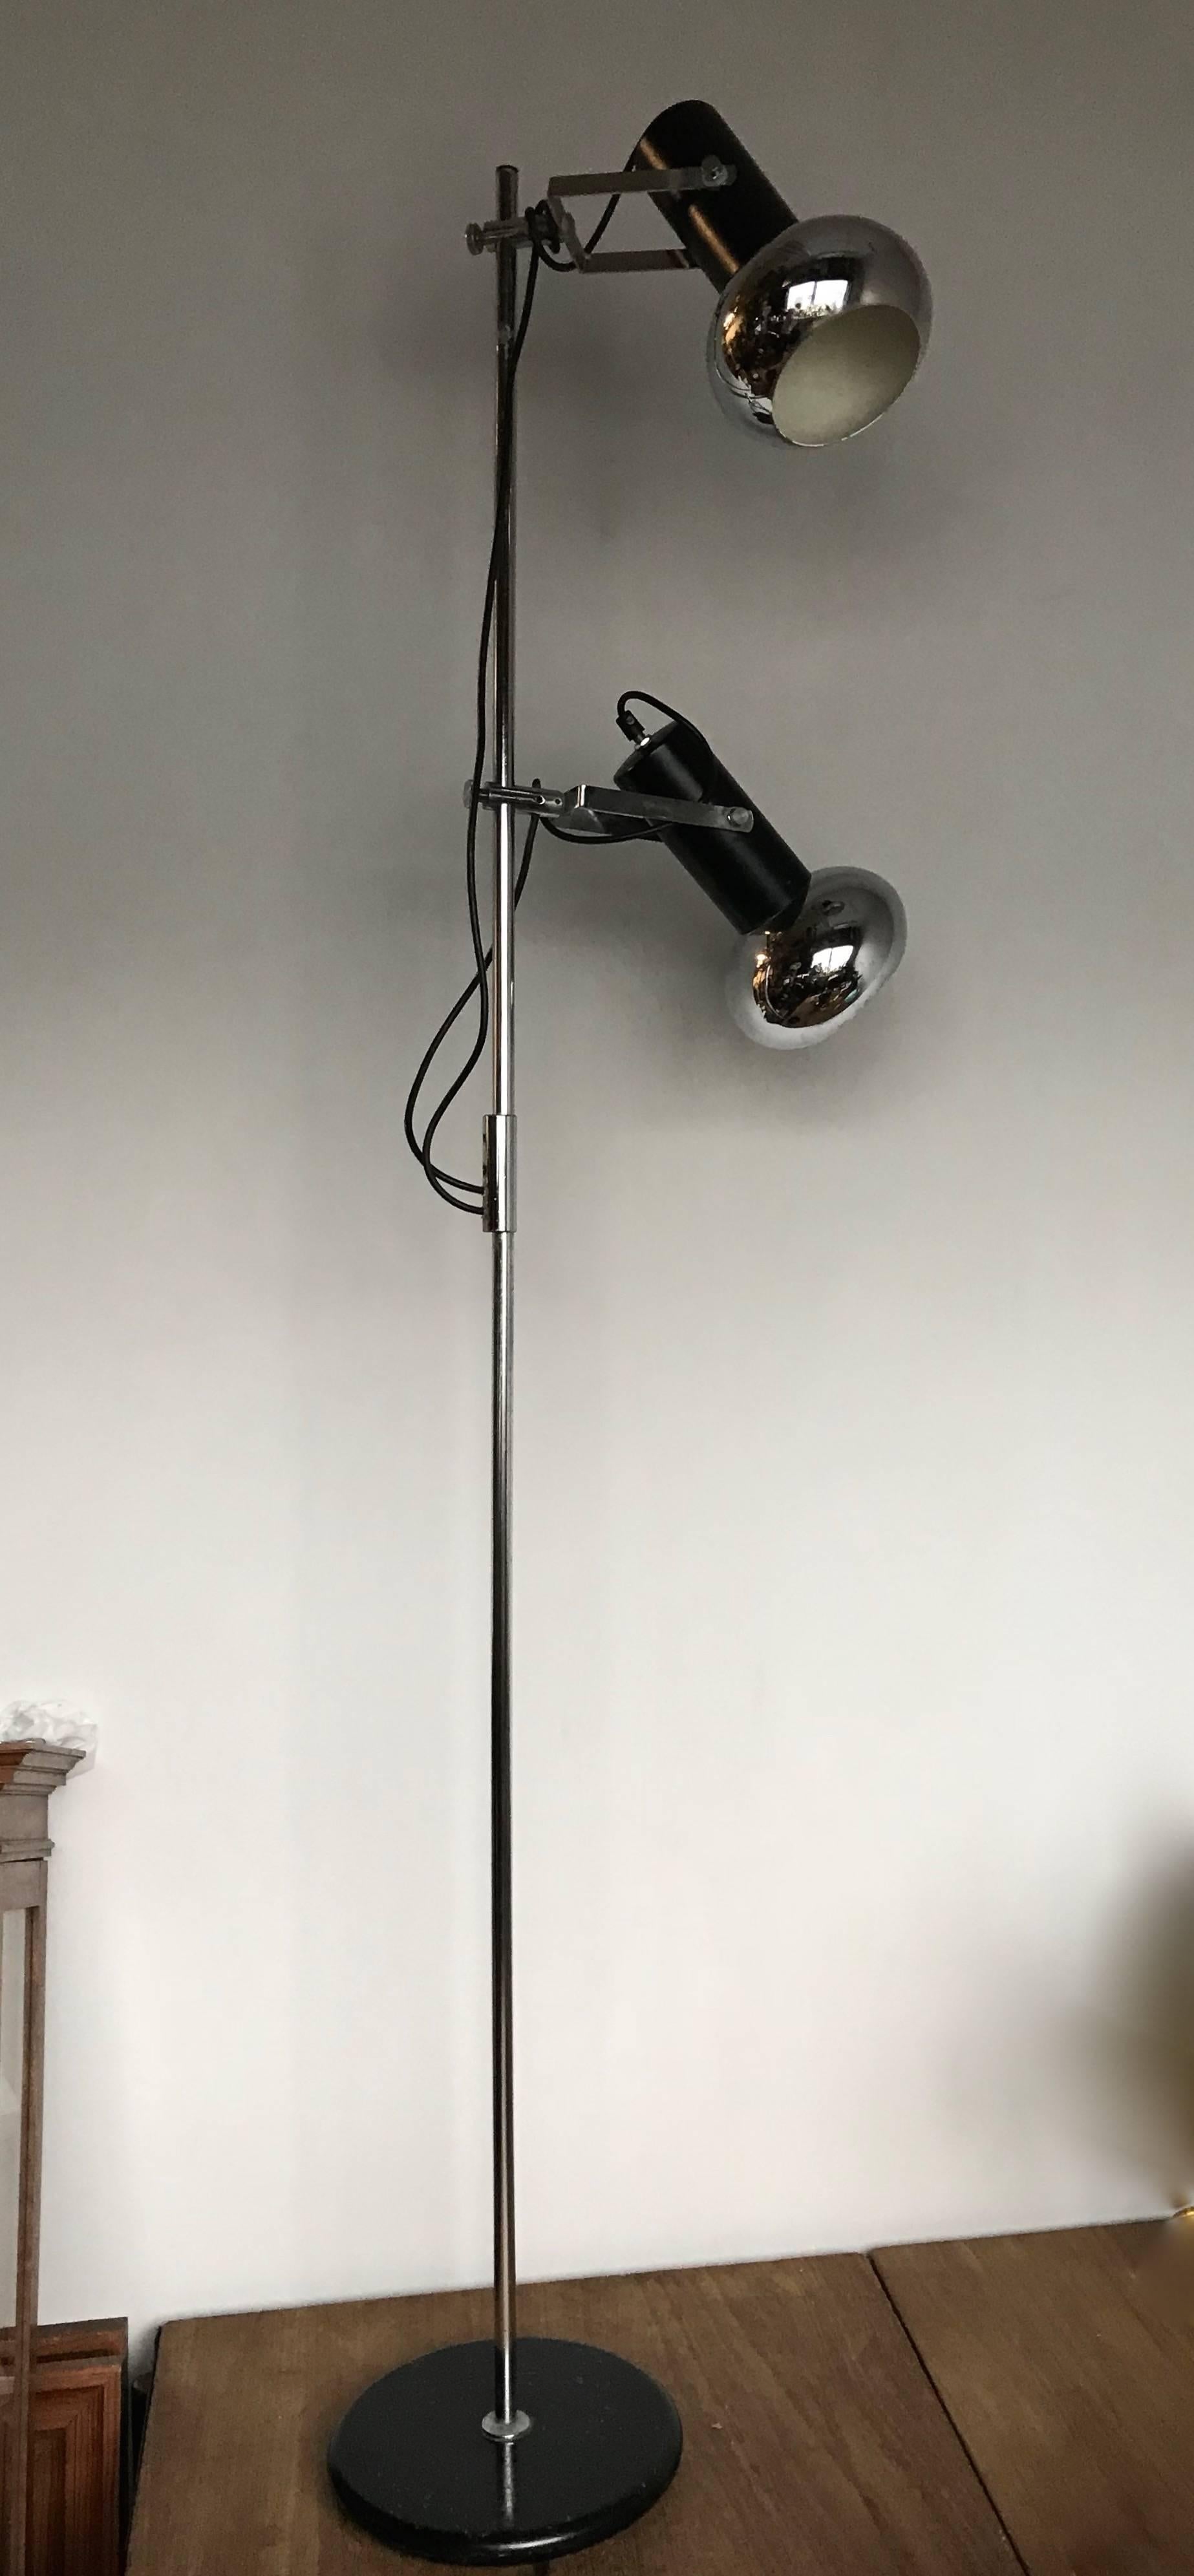 Stylish and practical floor lamp.

This quality made floor lamp of chrome and blacked metal could be your perfect lighting solution. This timeless, midcentury design can be used for all kinds of purposes and thanks to the colors it can be placed in